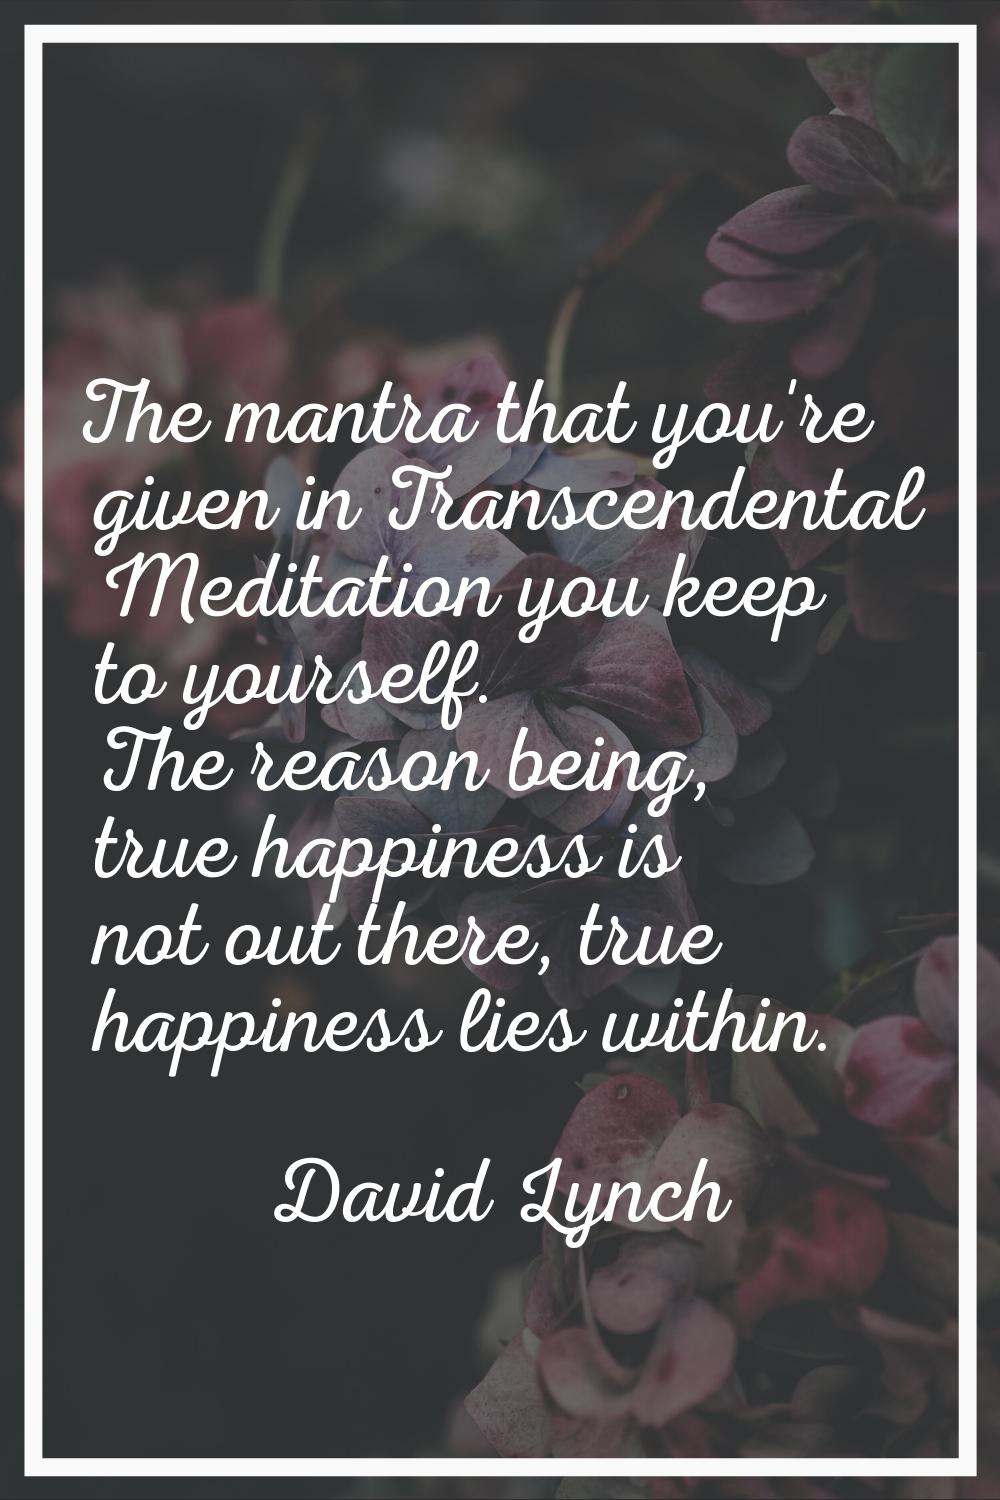 The mantra that you're given in Transcendental Meditation you keep to yourself. The reason being, t